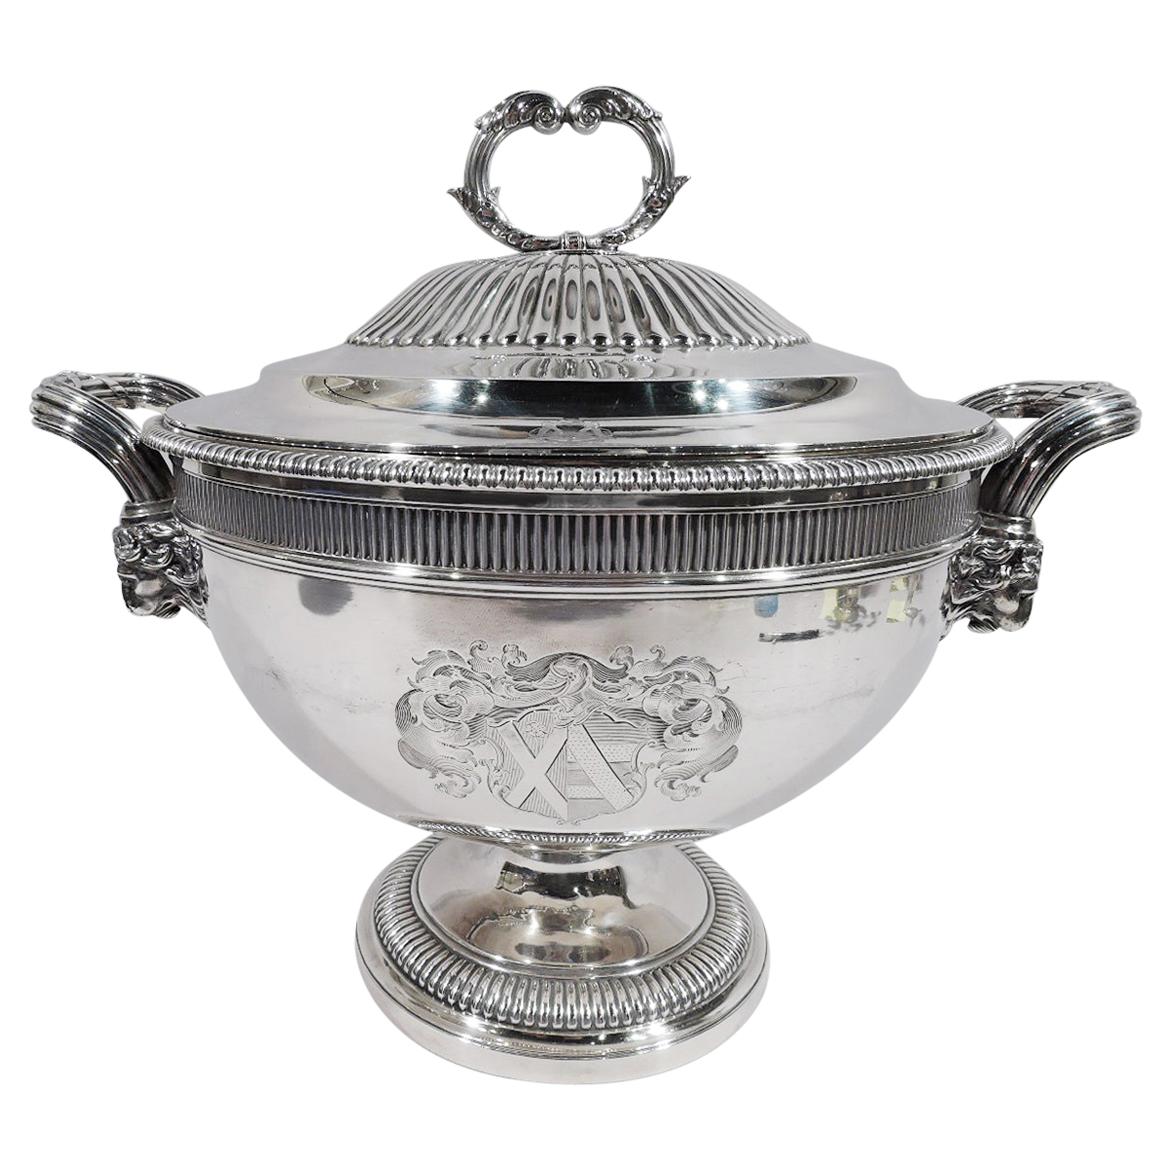 Magnificent English Regency Sterling Silver Soup Tureen by Paul Storr